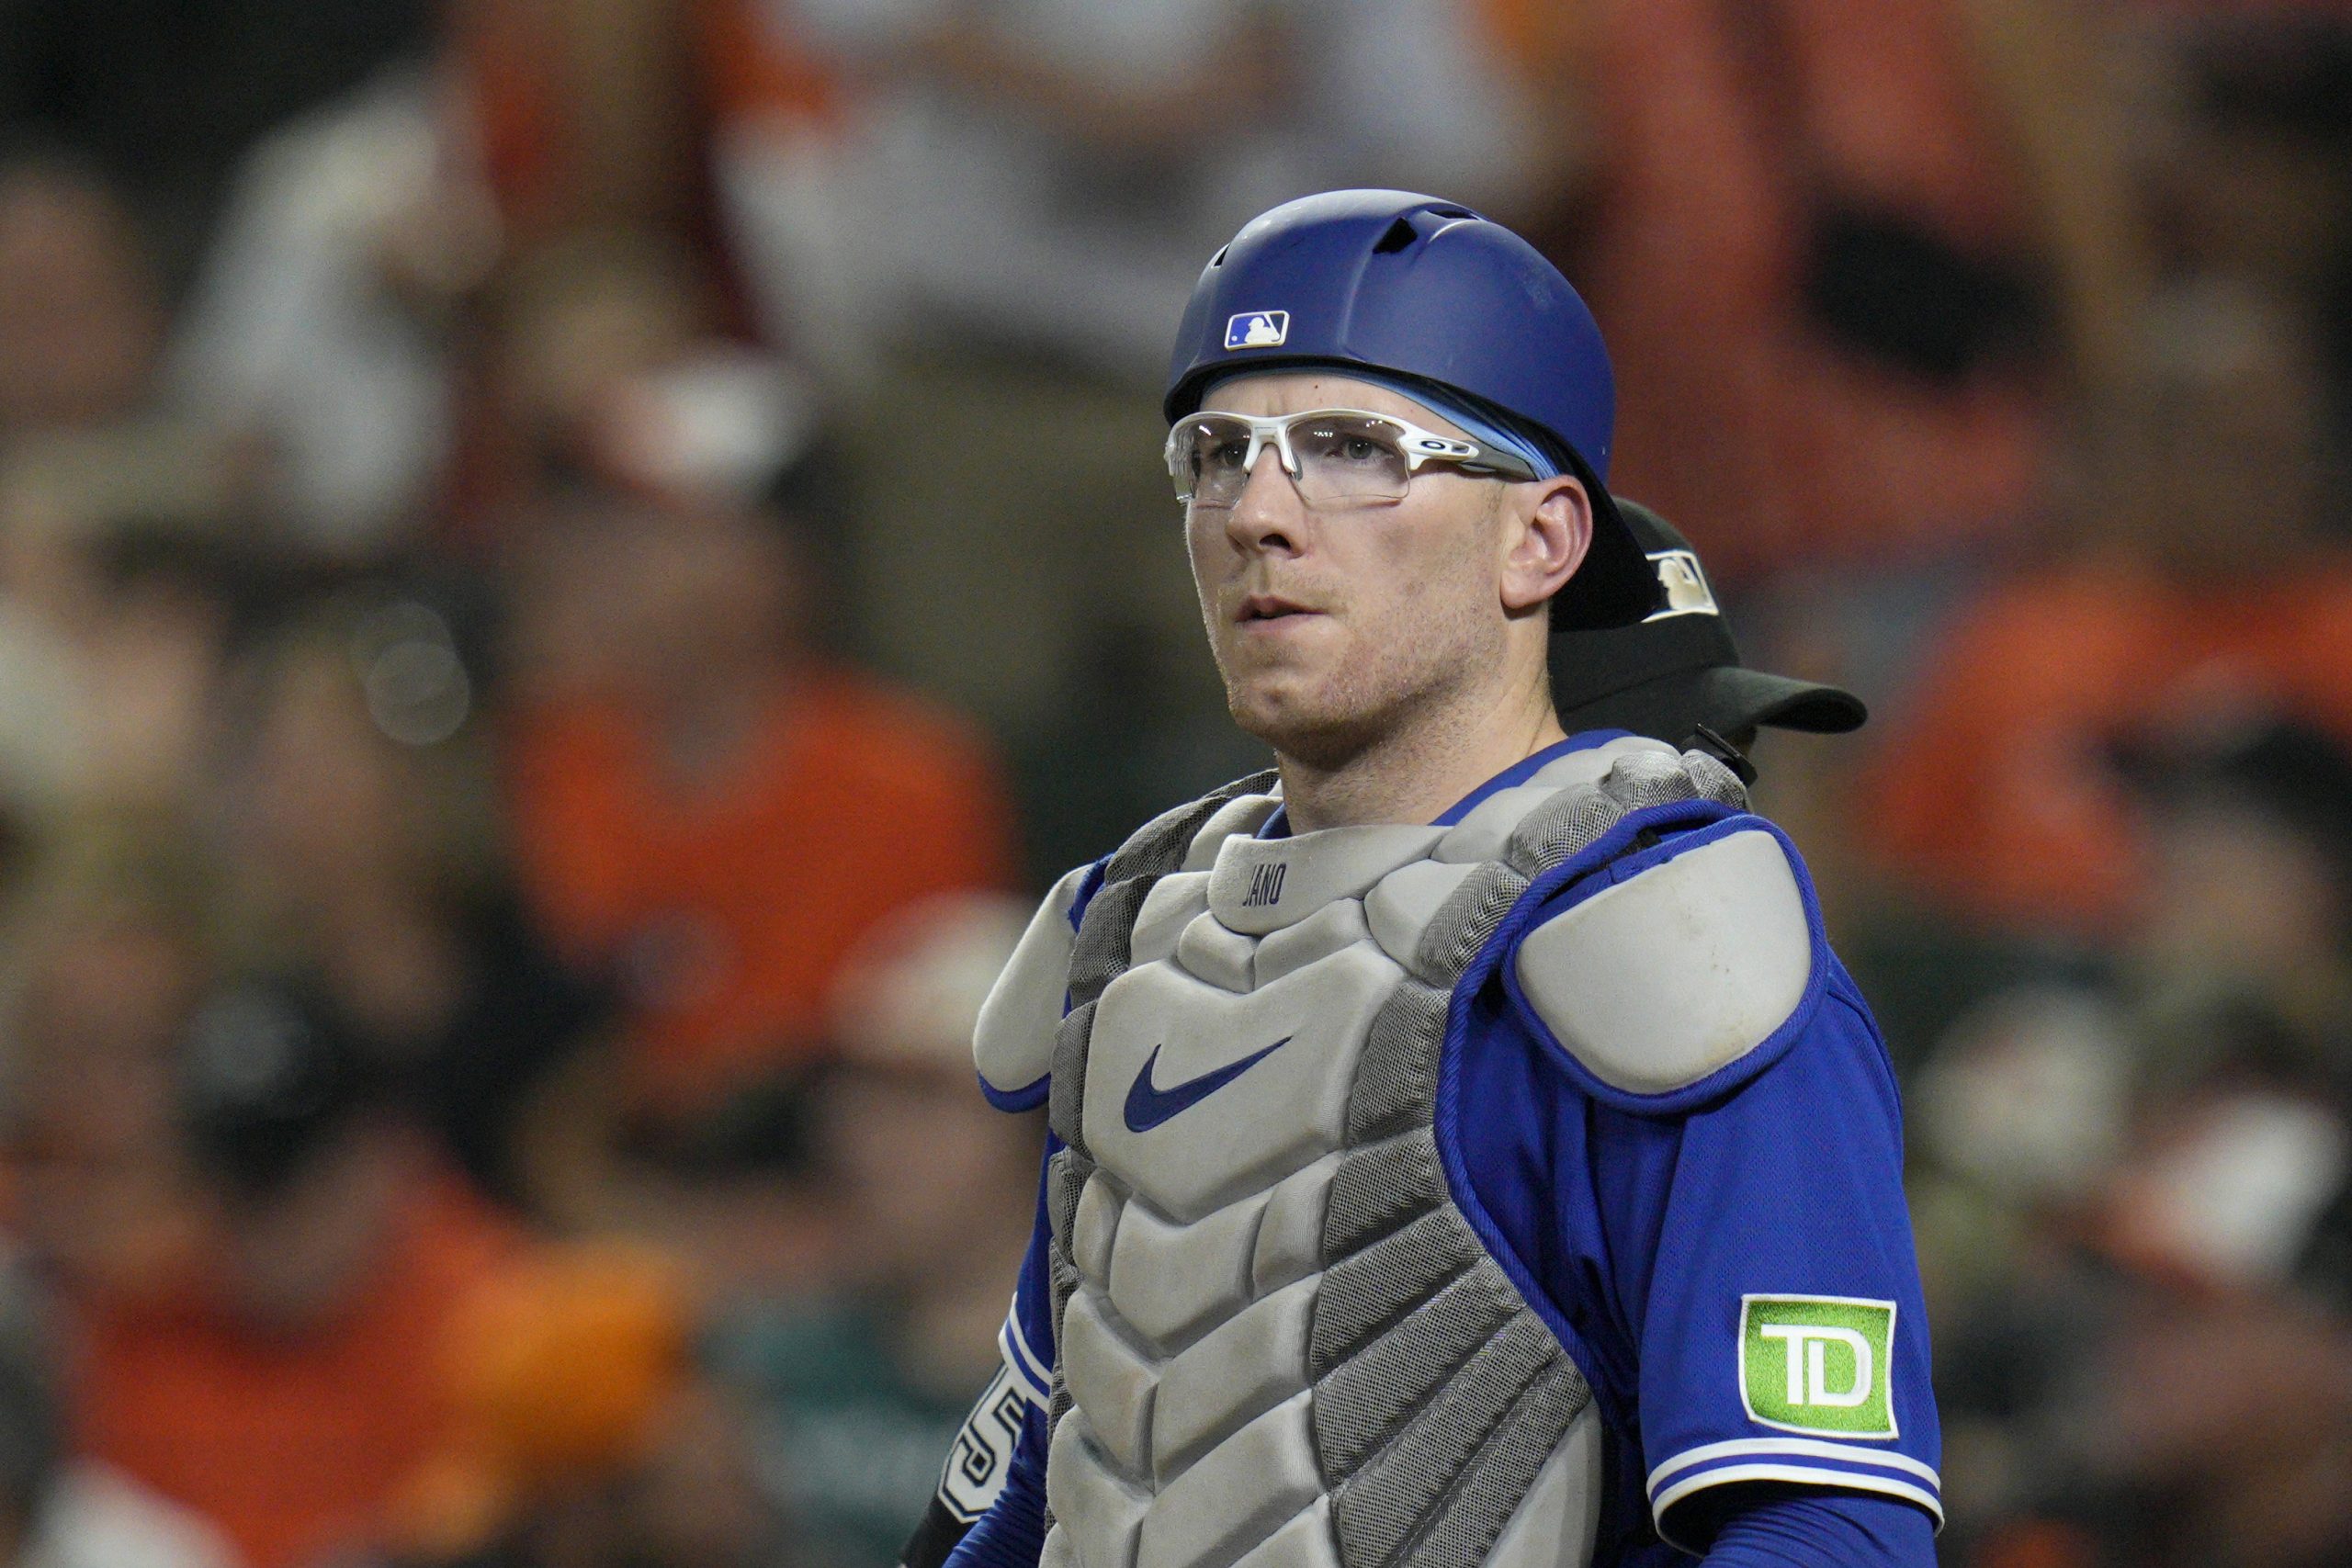 Catcher’s Return Timeline Unknown After Hit by Pitch [Video]